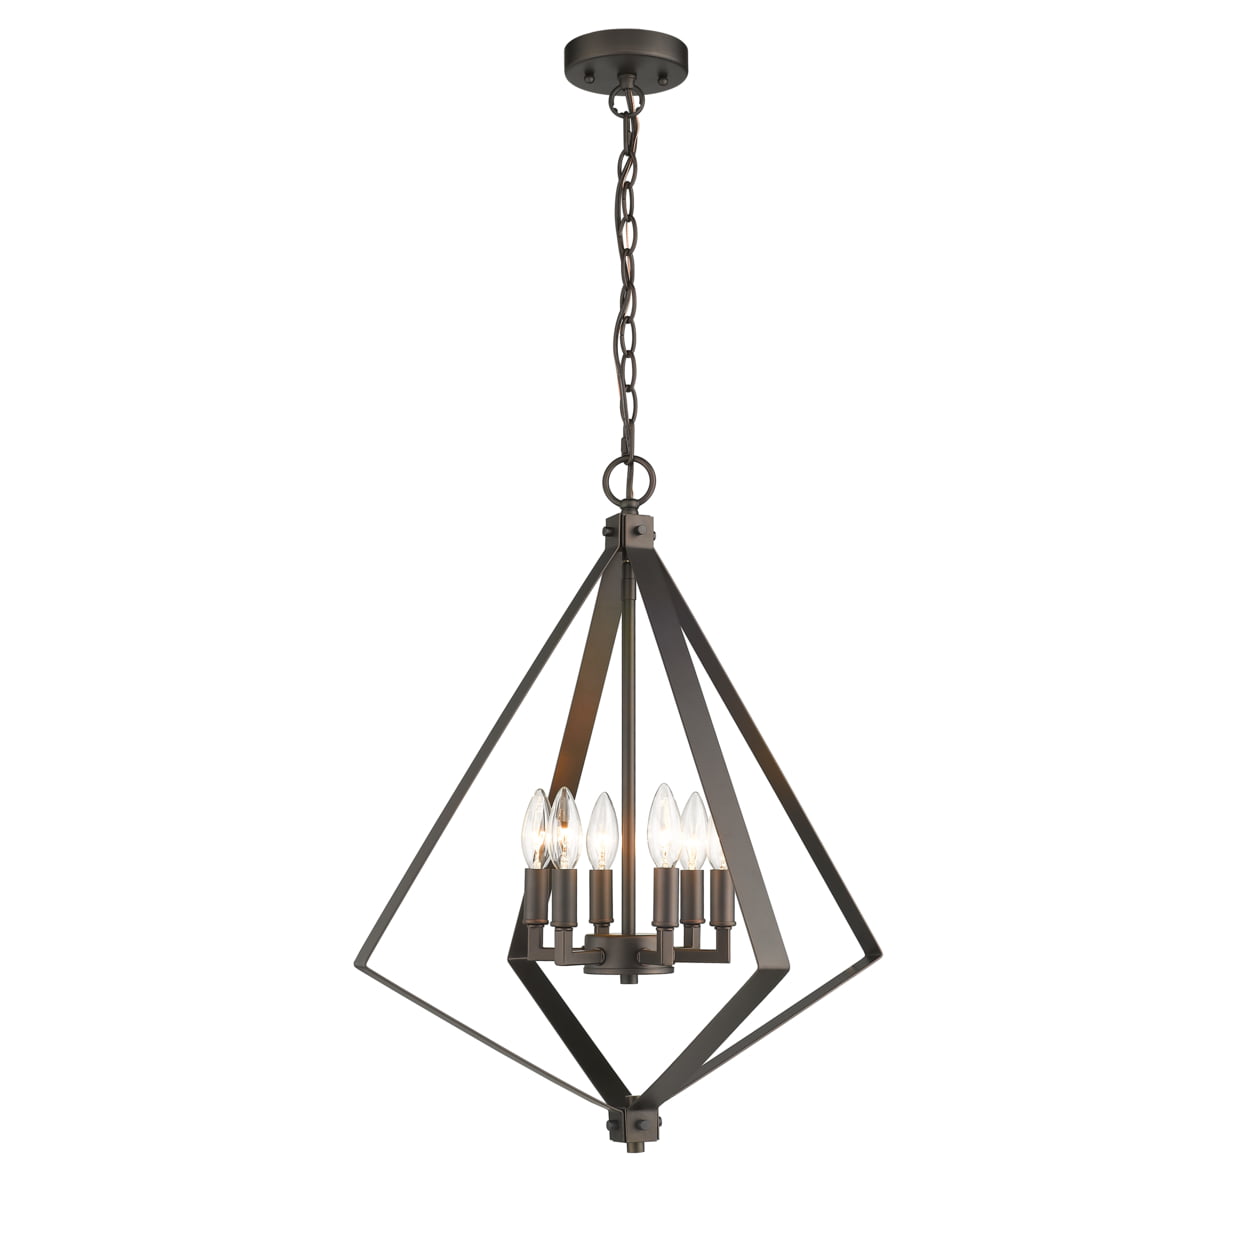 CH2S116RB20-UP6 Hudson Transitional 6 Light Rubbed Bronze Ceiling Pendant - 20 in -  CHLOE Lighting